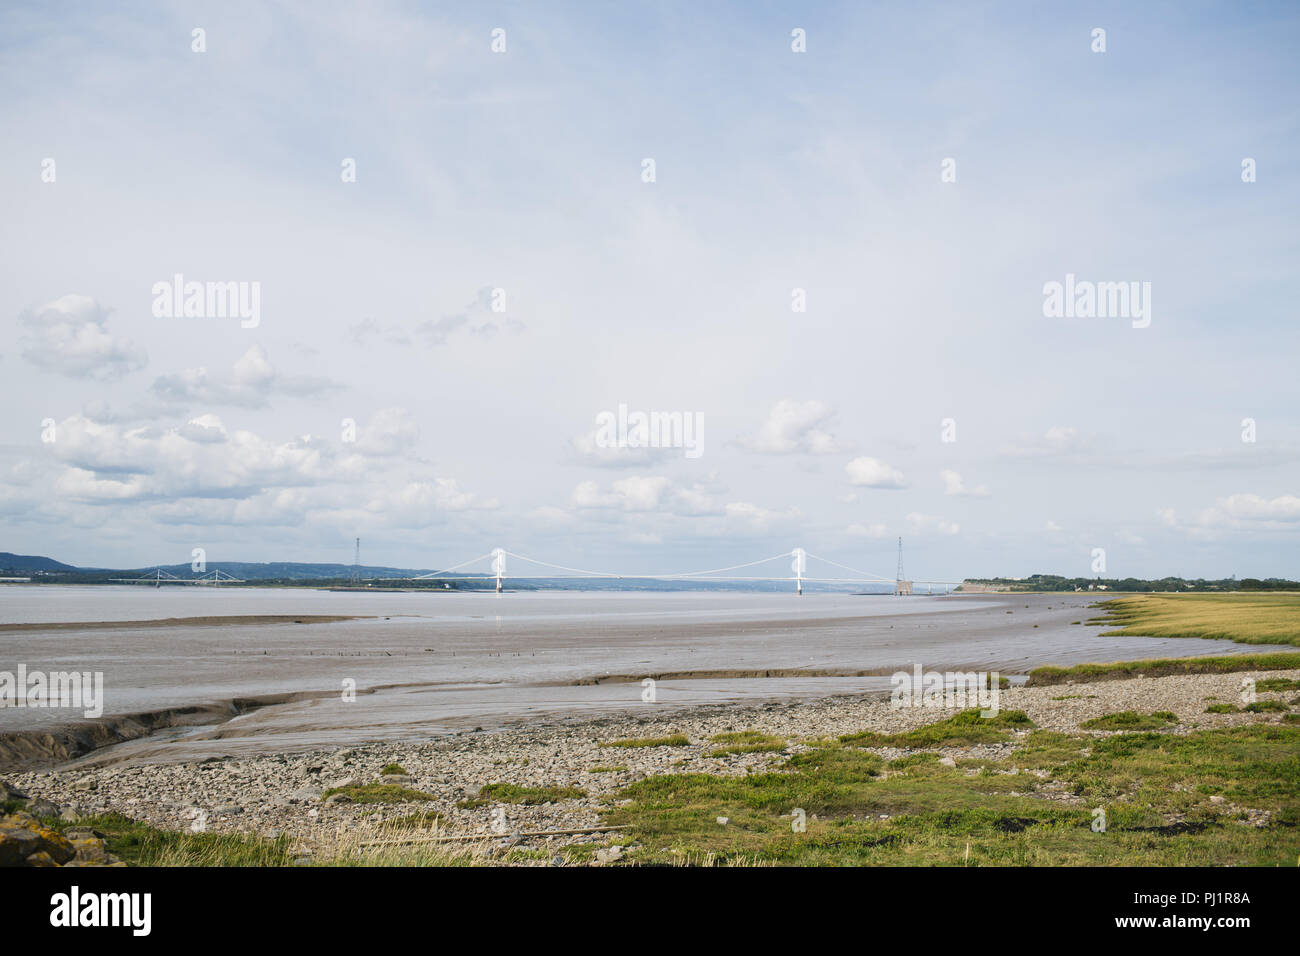 View of the Severn Bridge and the River Severn at low tide from the English side. Suspension Bridge. Tolls due to end in 2018. M48 motorway Stock Photo